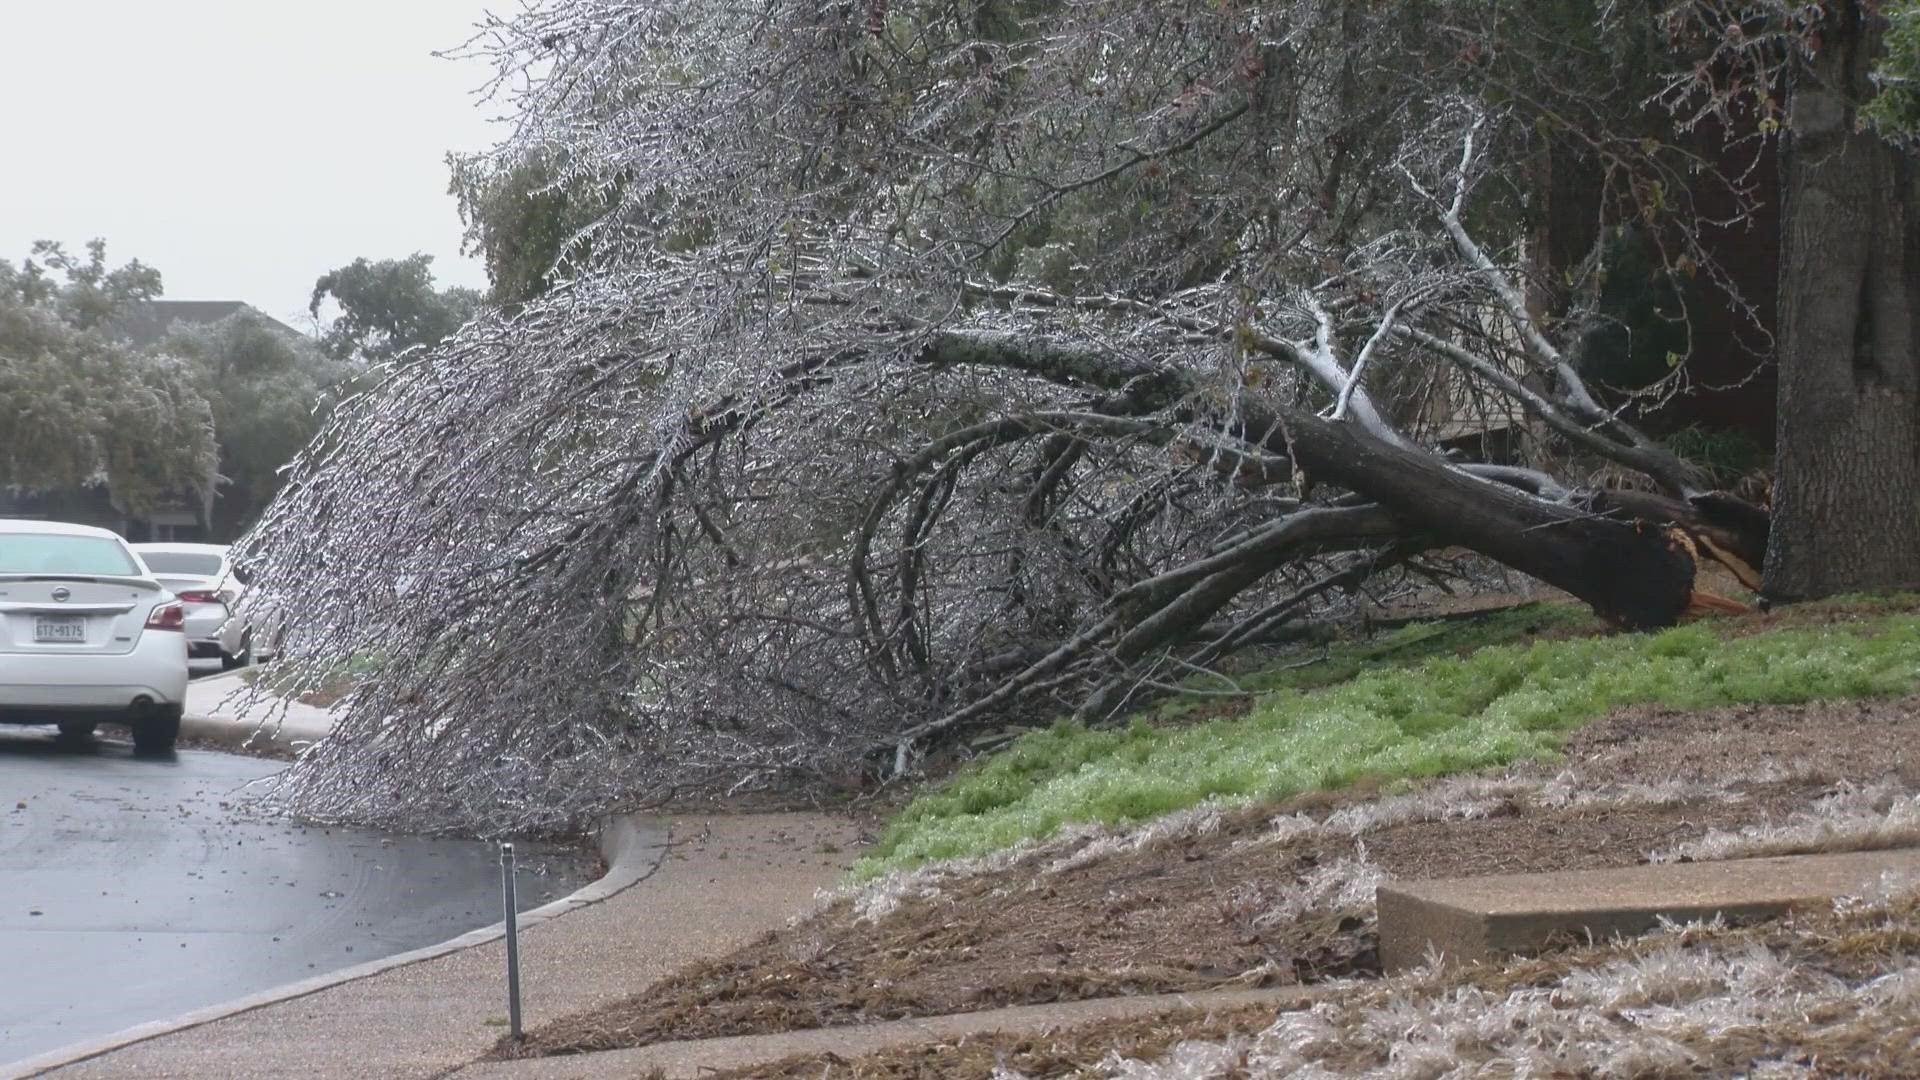 Many around San Antonio are paying thousands to clean up damaged tree limbs that pose a danger to people and power lines.